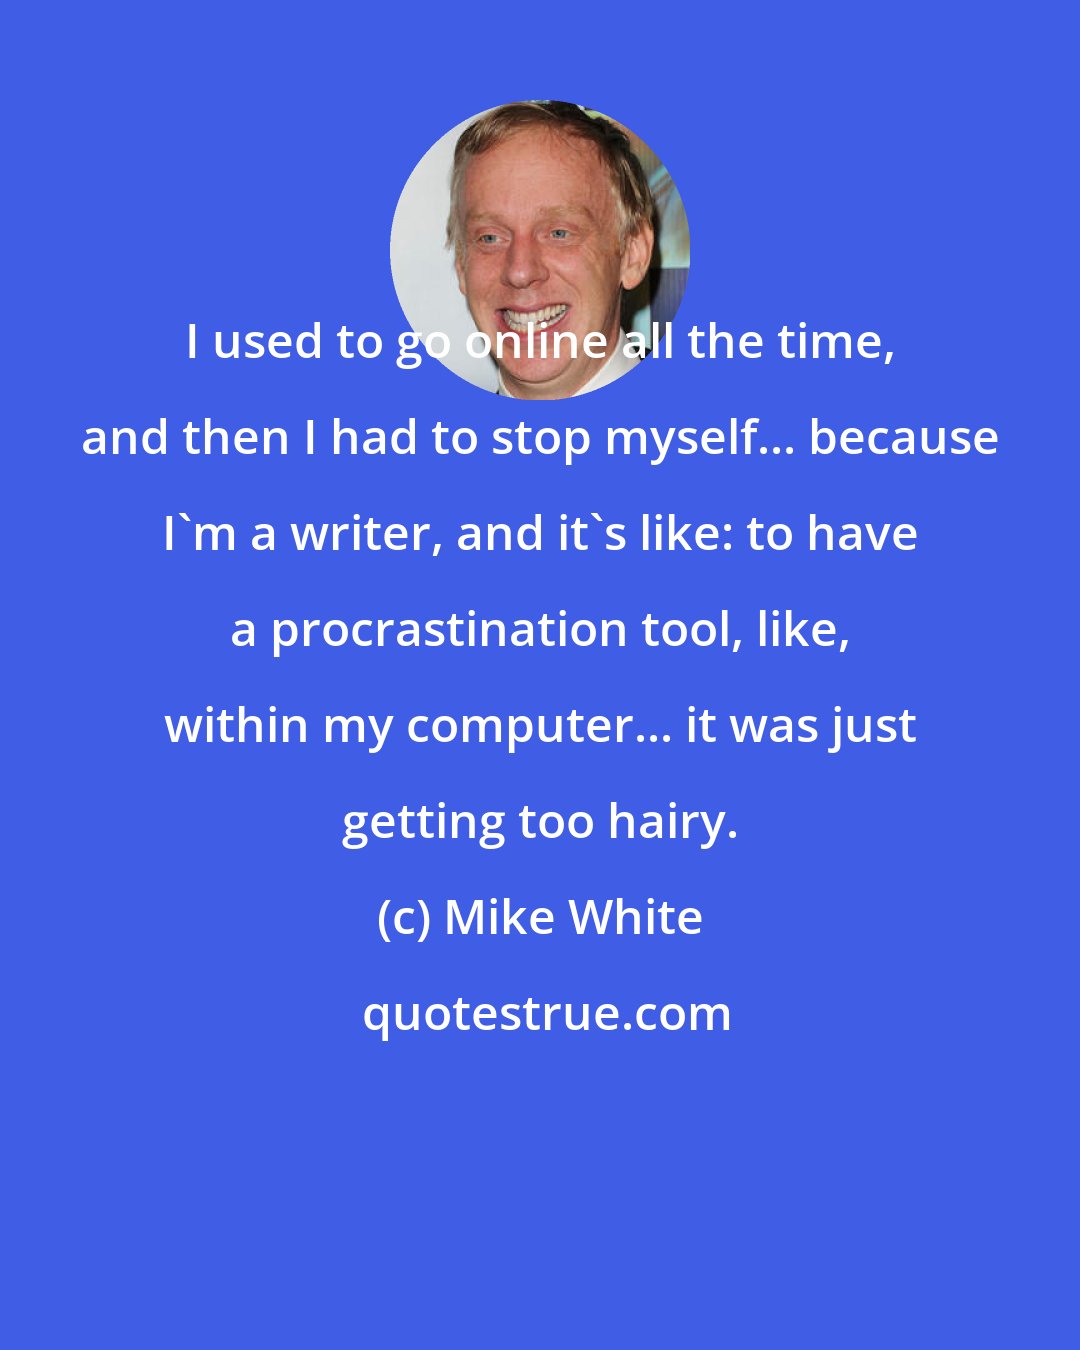 Mike White: I used to go online all the time, and then I had to stop myself... because I'm a writer, and it's like: to have a procrastination tool, like, within my computer... it was just getting too hairy.